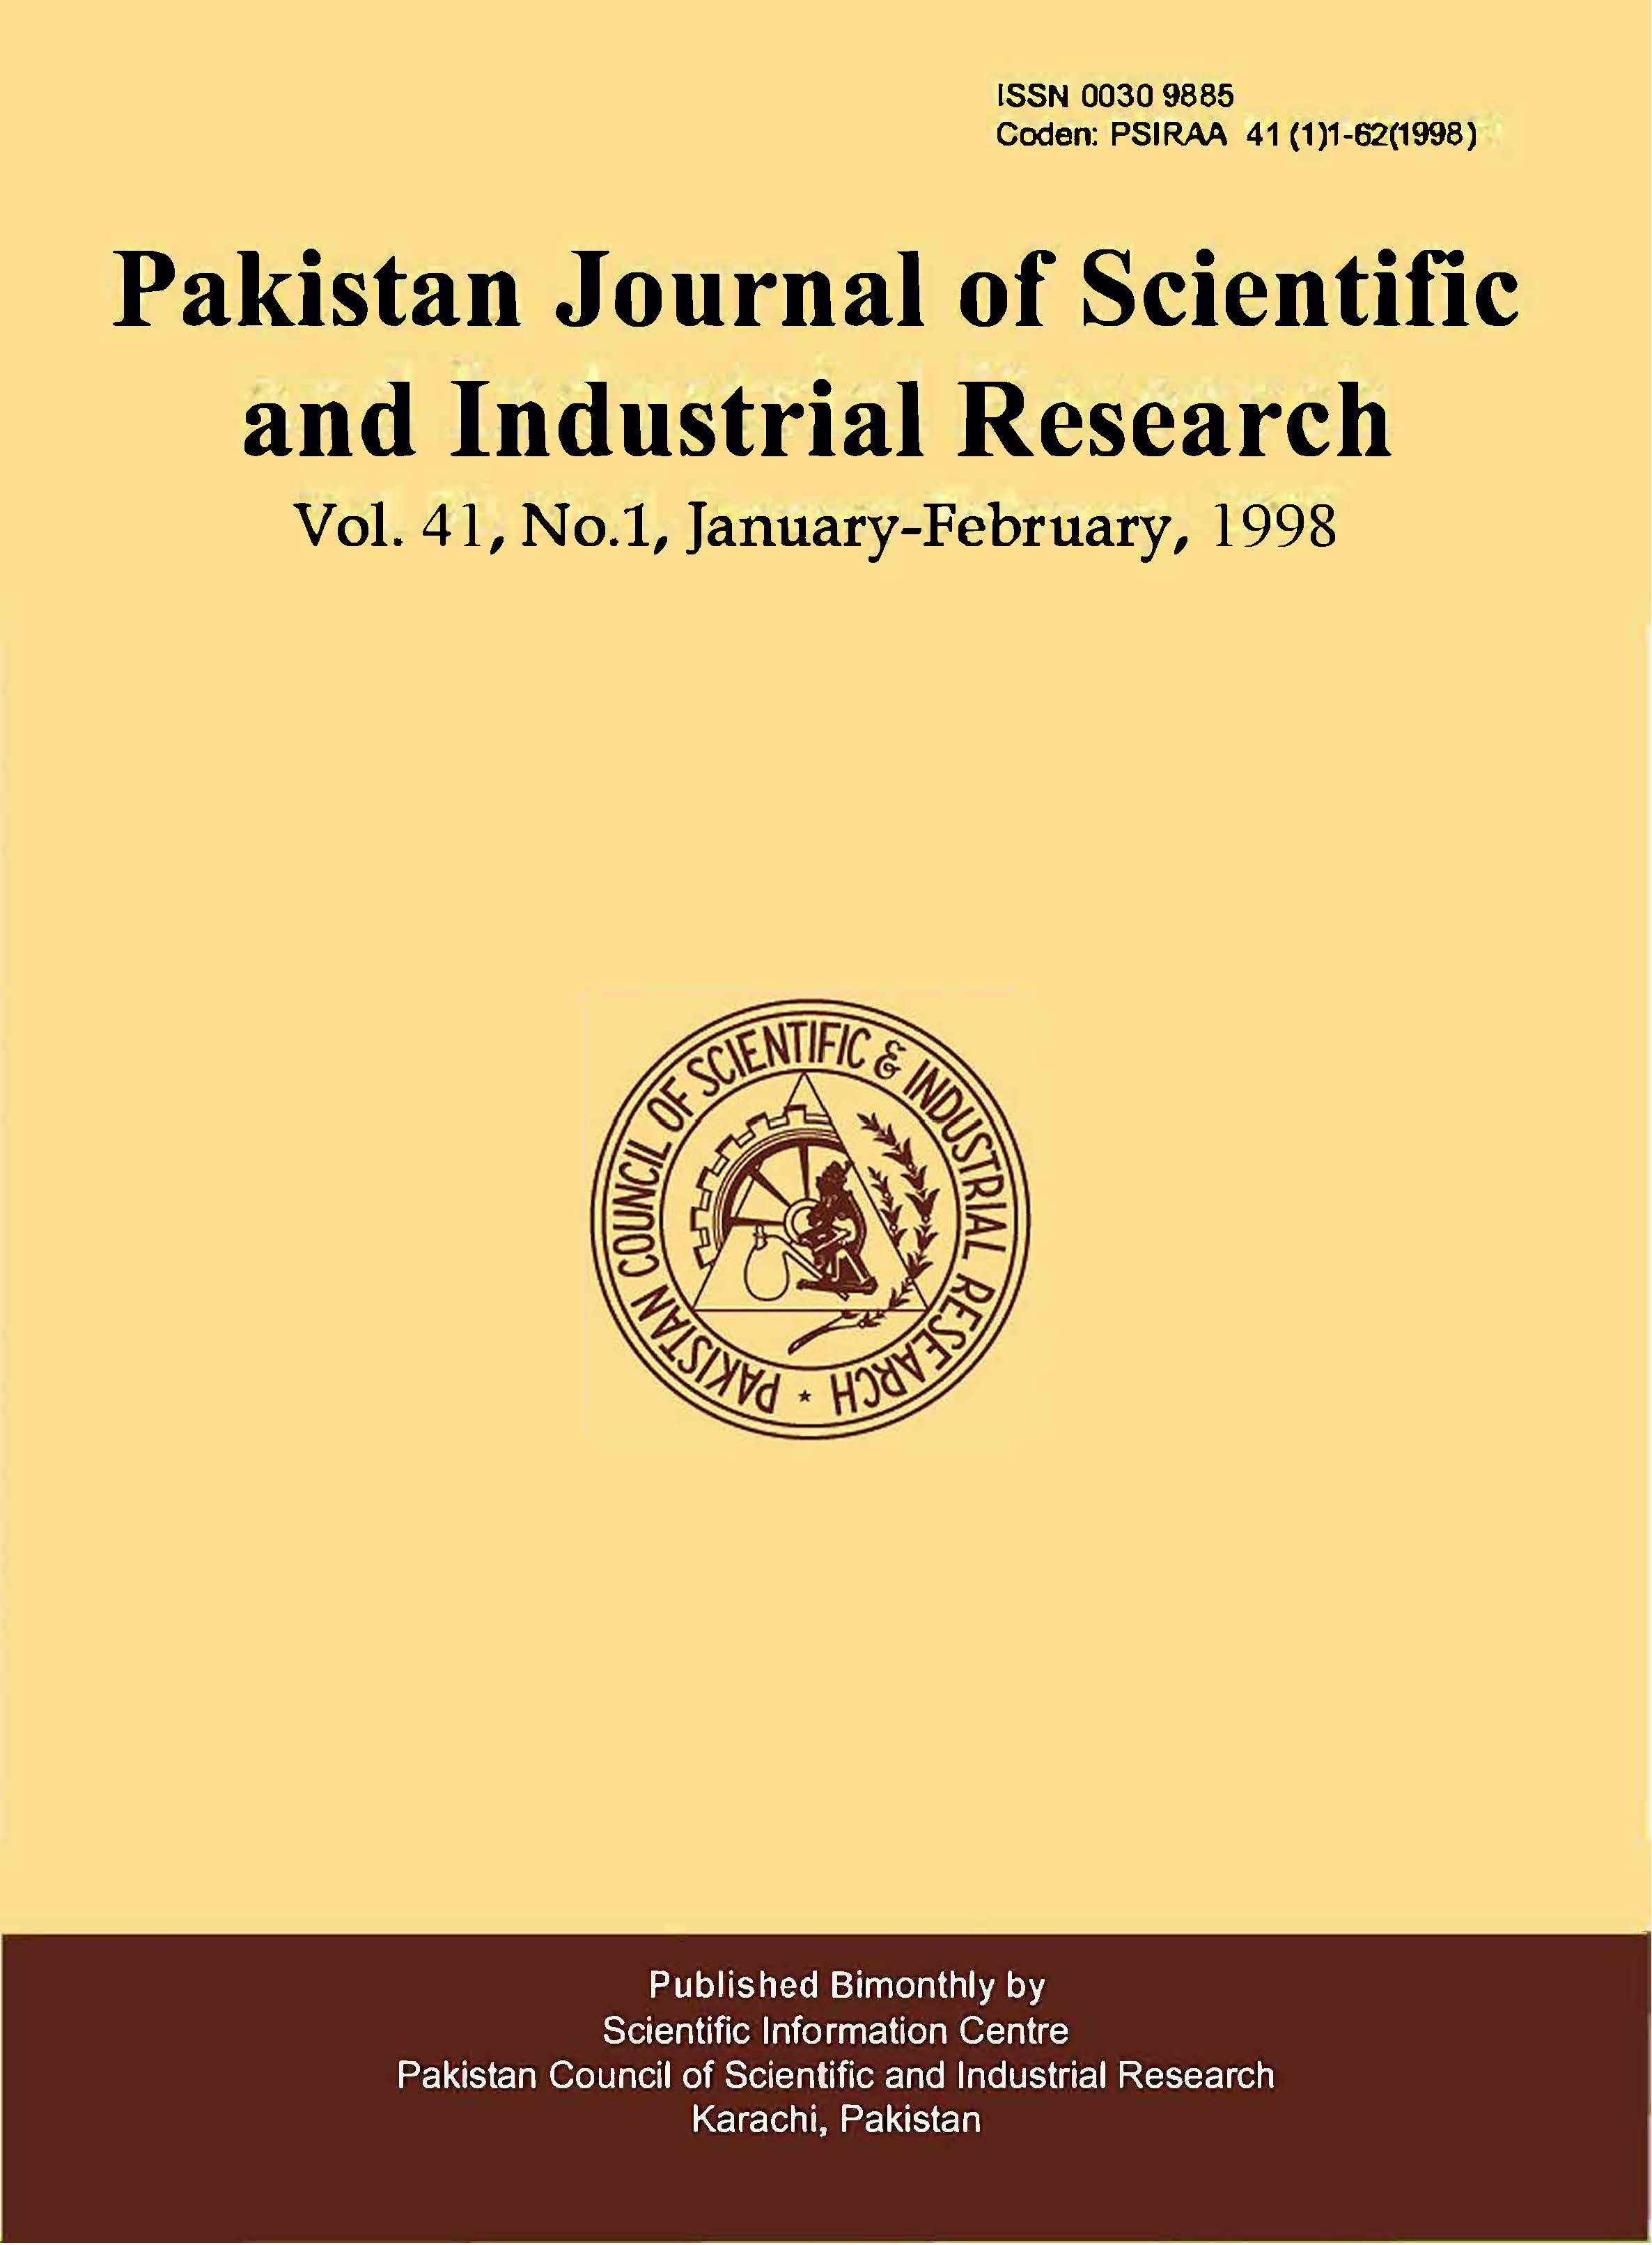 					View Vol. 41 No. 1 (1998): Pakistan Journal of Scientific and Industrial Research
				